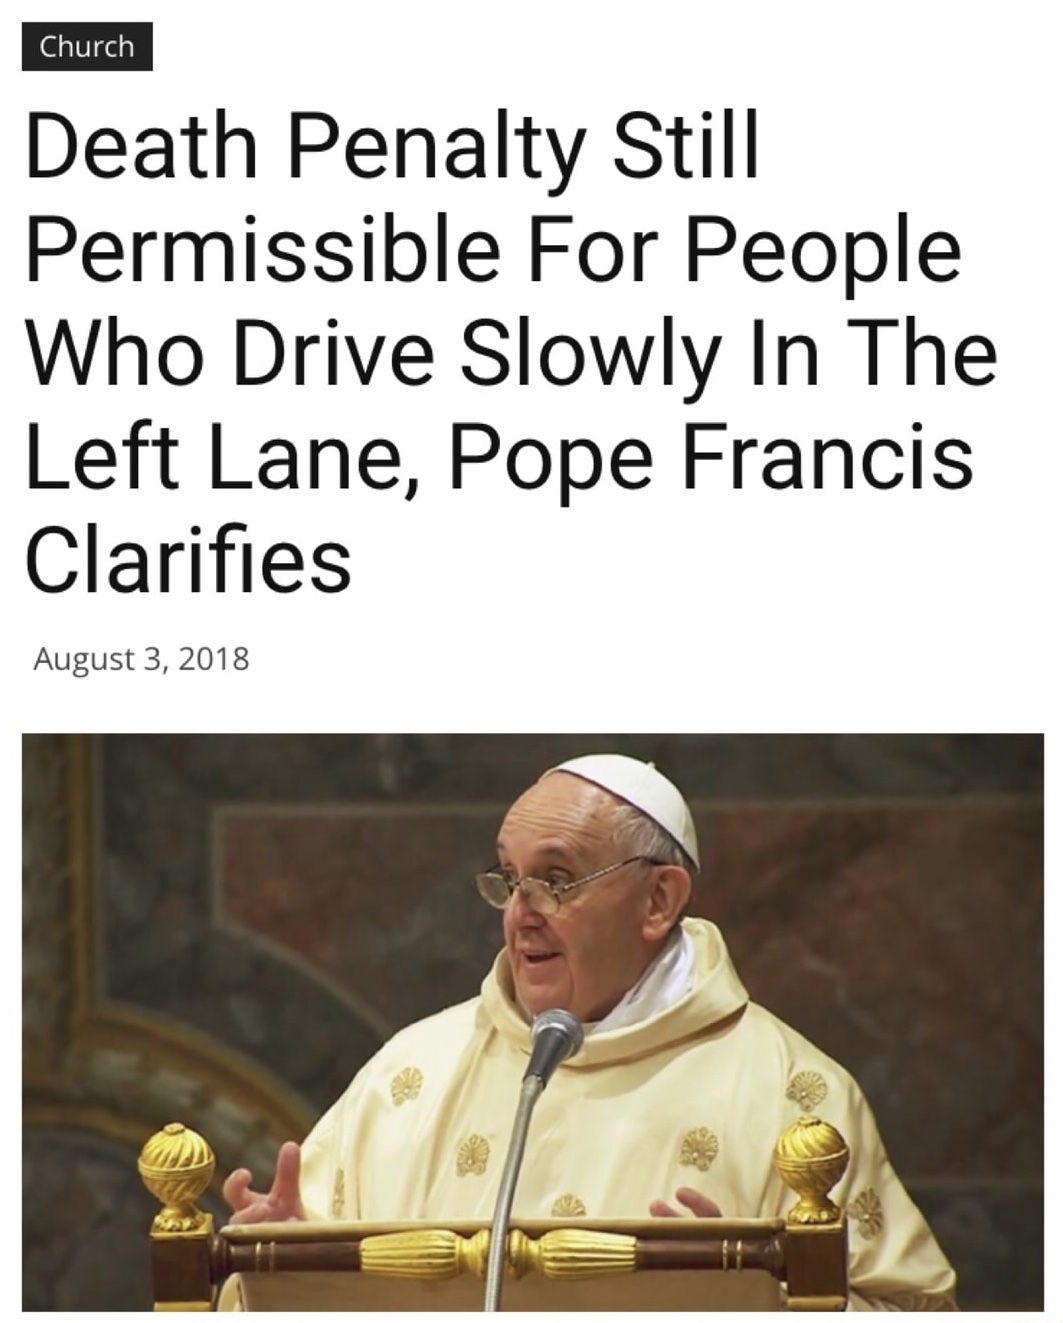 Funny headline of Pope clarifying that death penalty still possible for those who drive slowly in the left lane